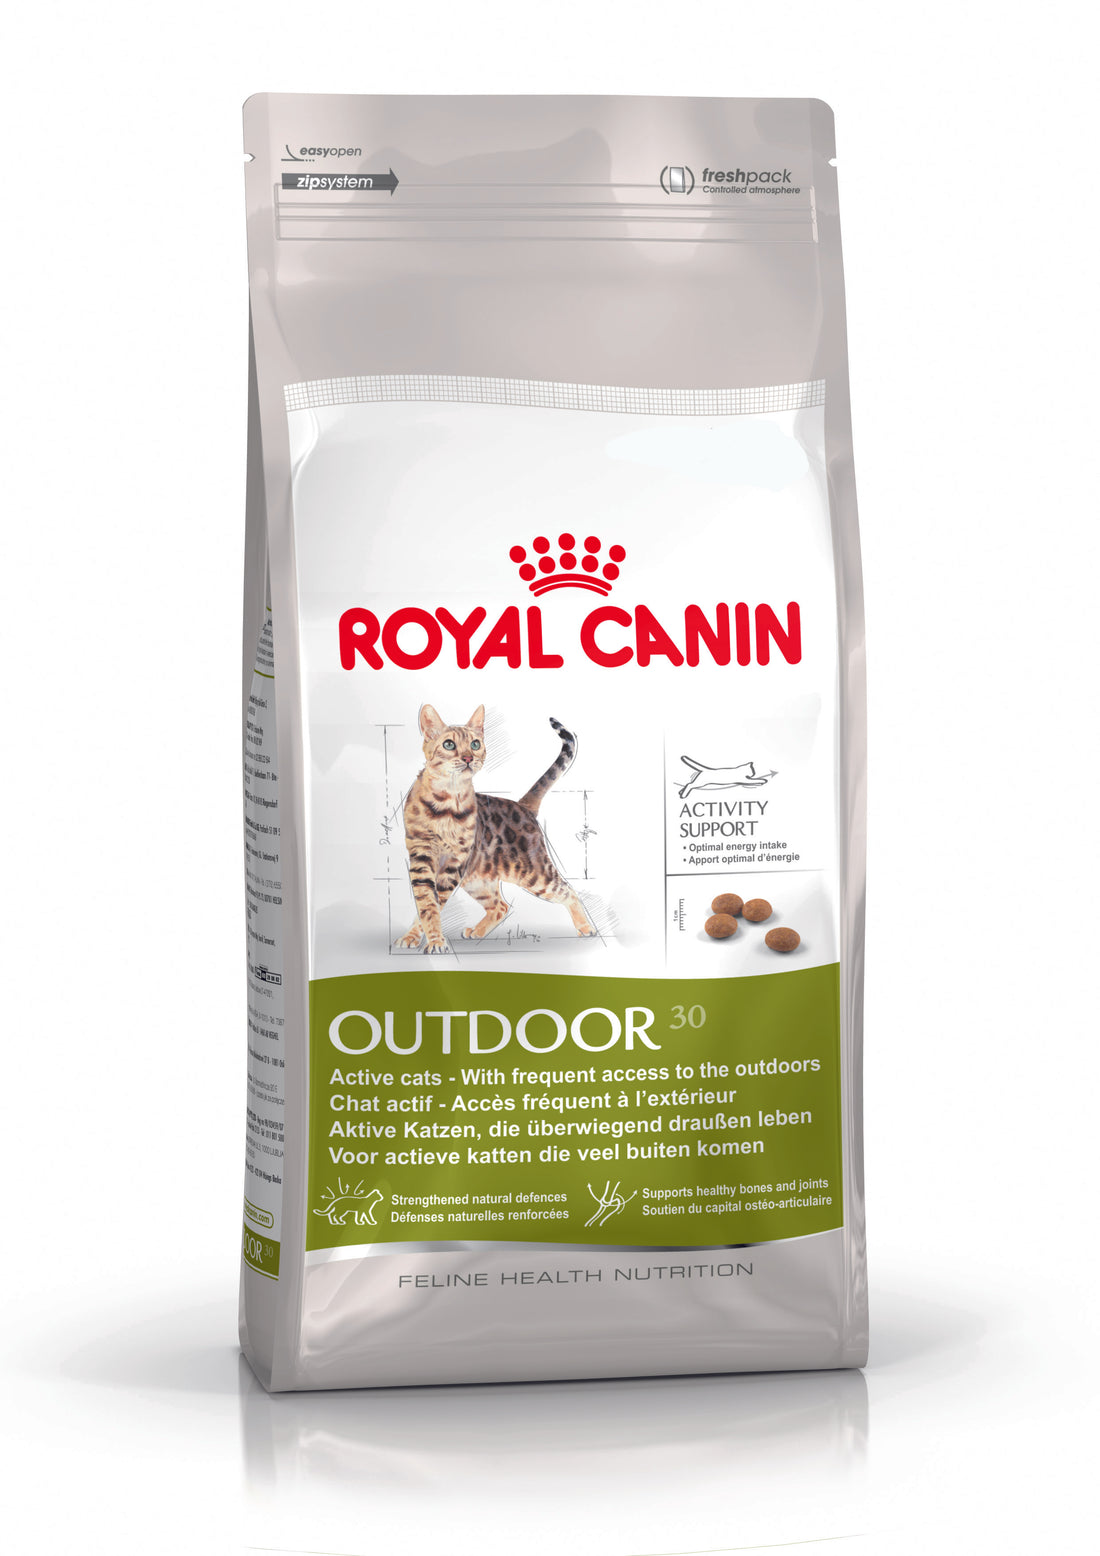 Royal Canin-Outdoor 30 Cat Food 400g